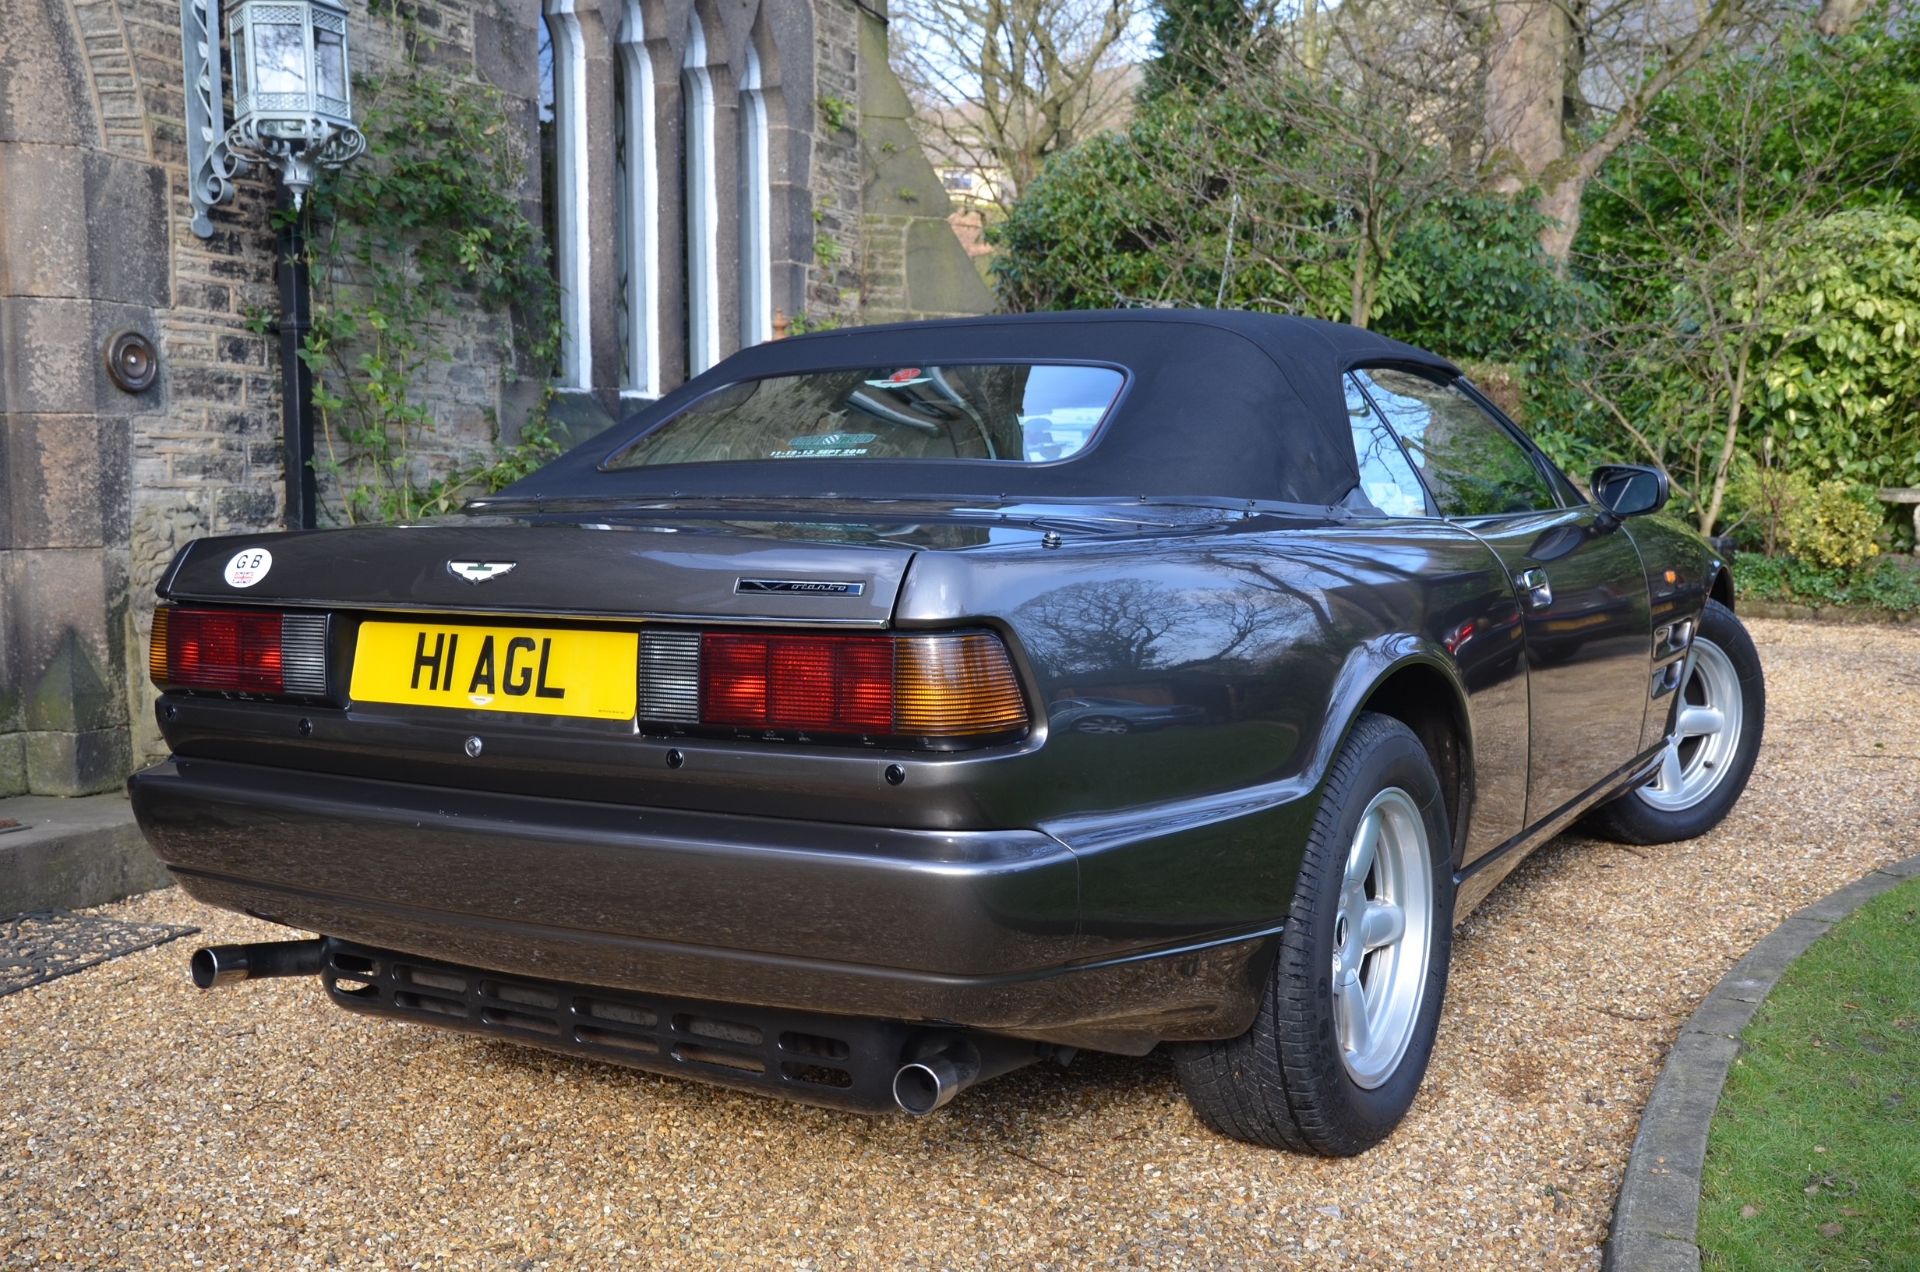 1993 Aston Martin Virage Volante - Having 11 months MOT and aviators number plate H1 AGL - Image 3 of 48